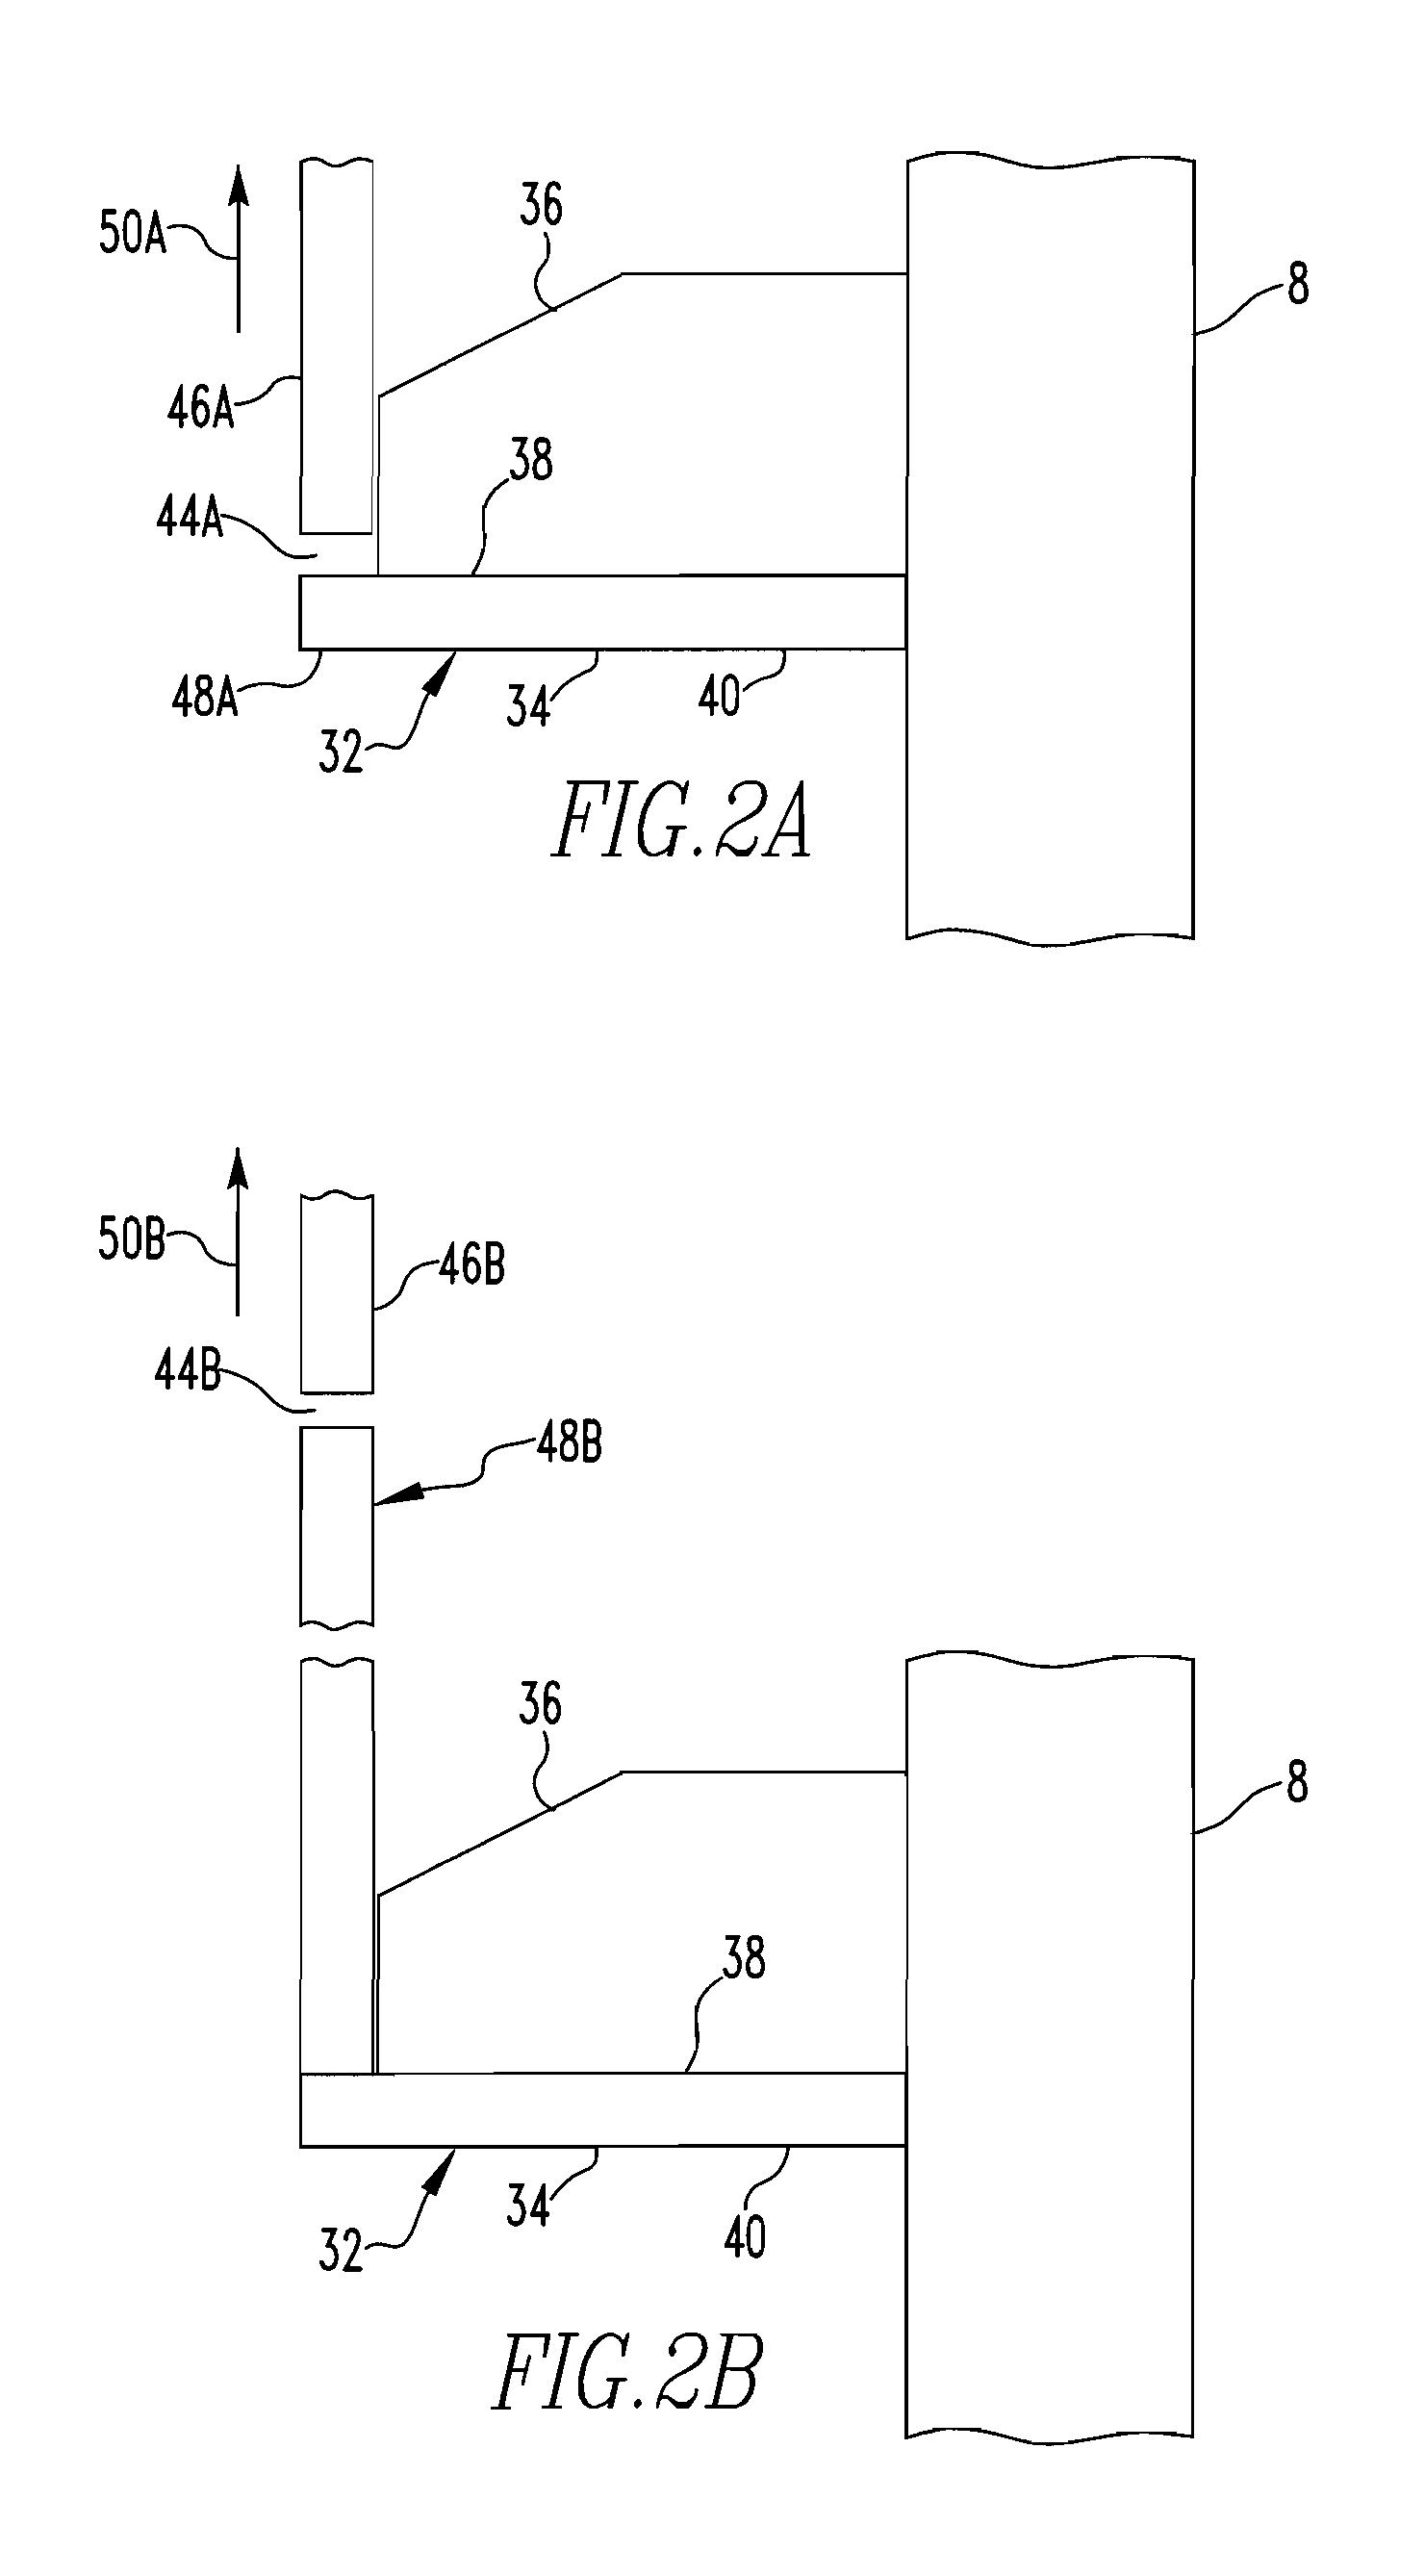 Method of Replacing Shroud of Boiling Water Nuclear Reactor, and Associated Apparatus